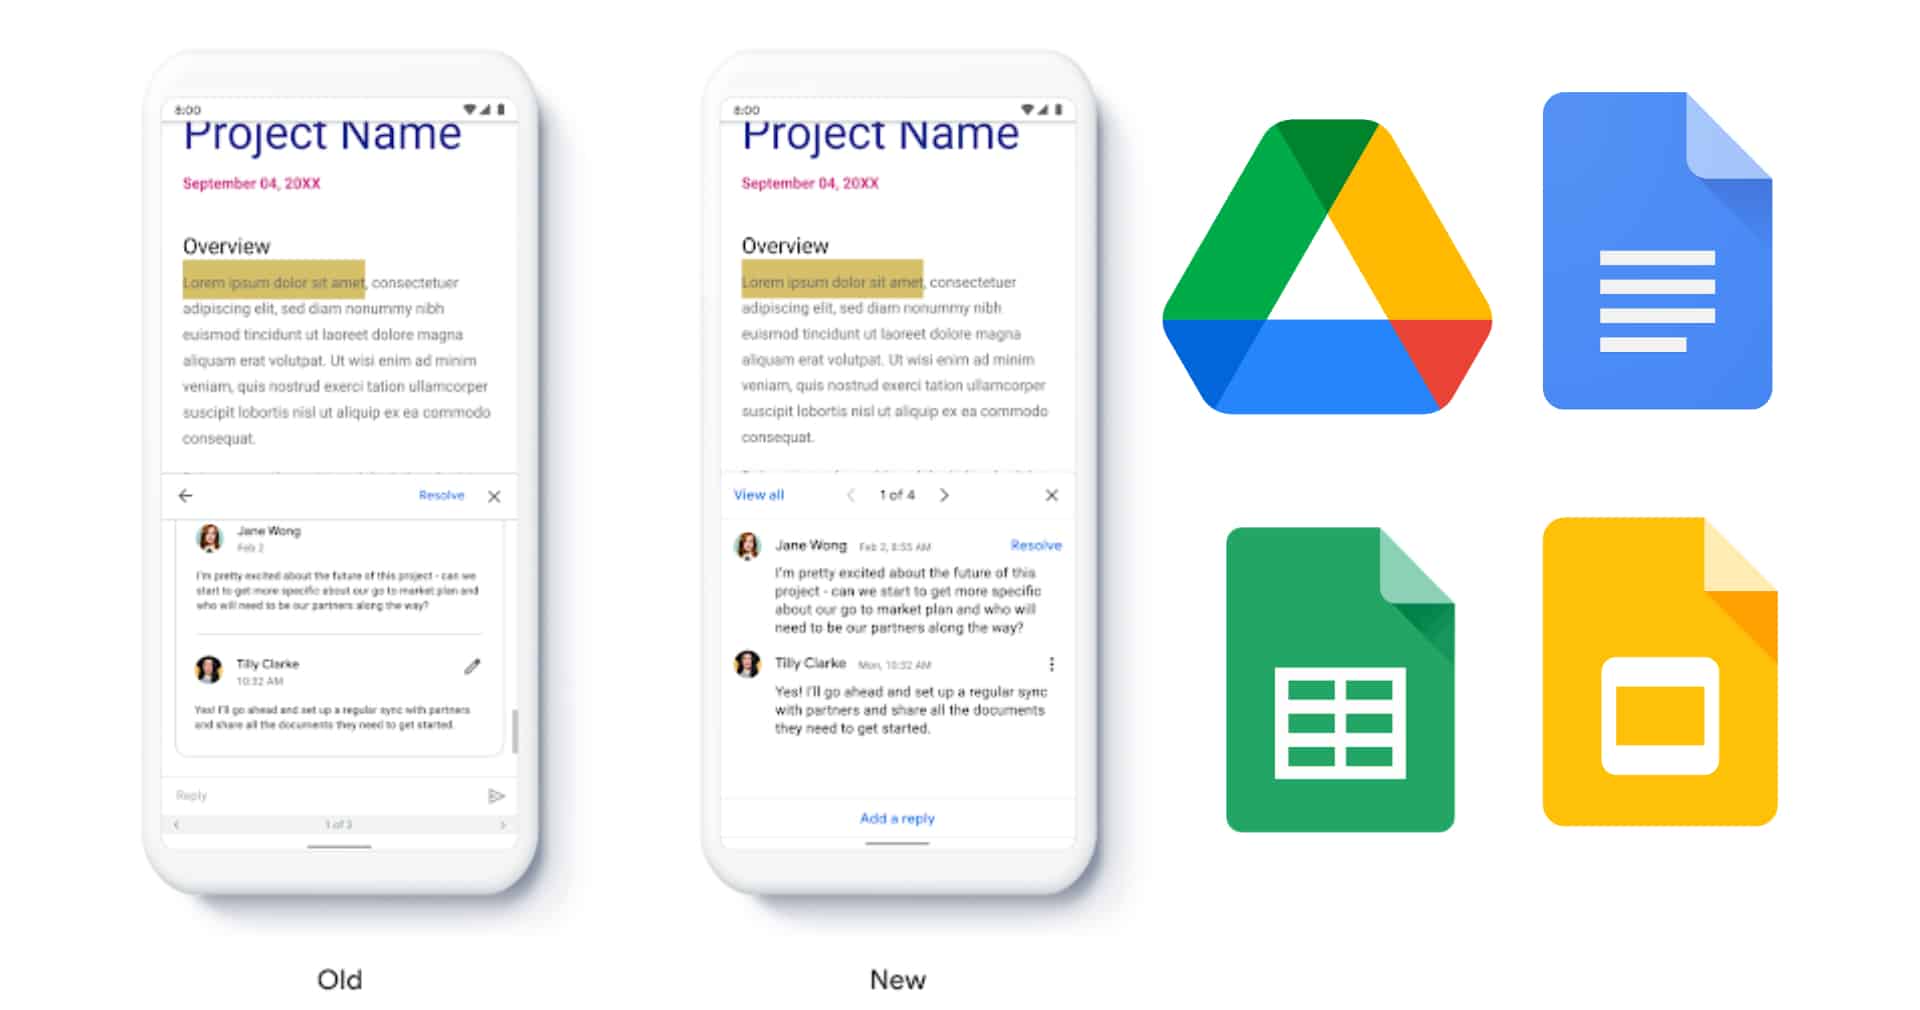 Google Rolls Out New Comment Interface for Google Docs, Sheets, and Slides iOS Apps